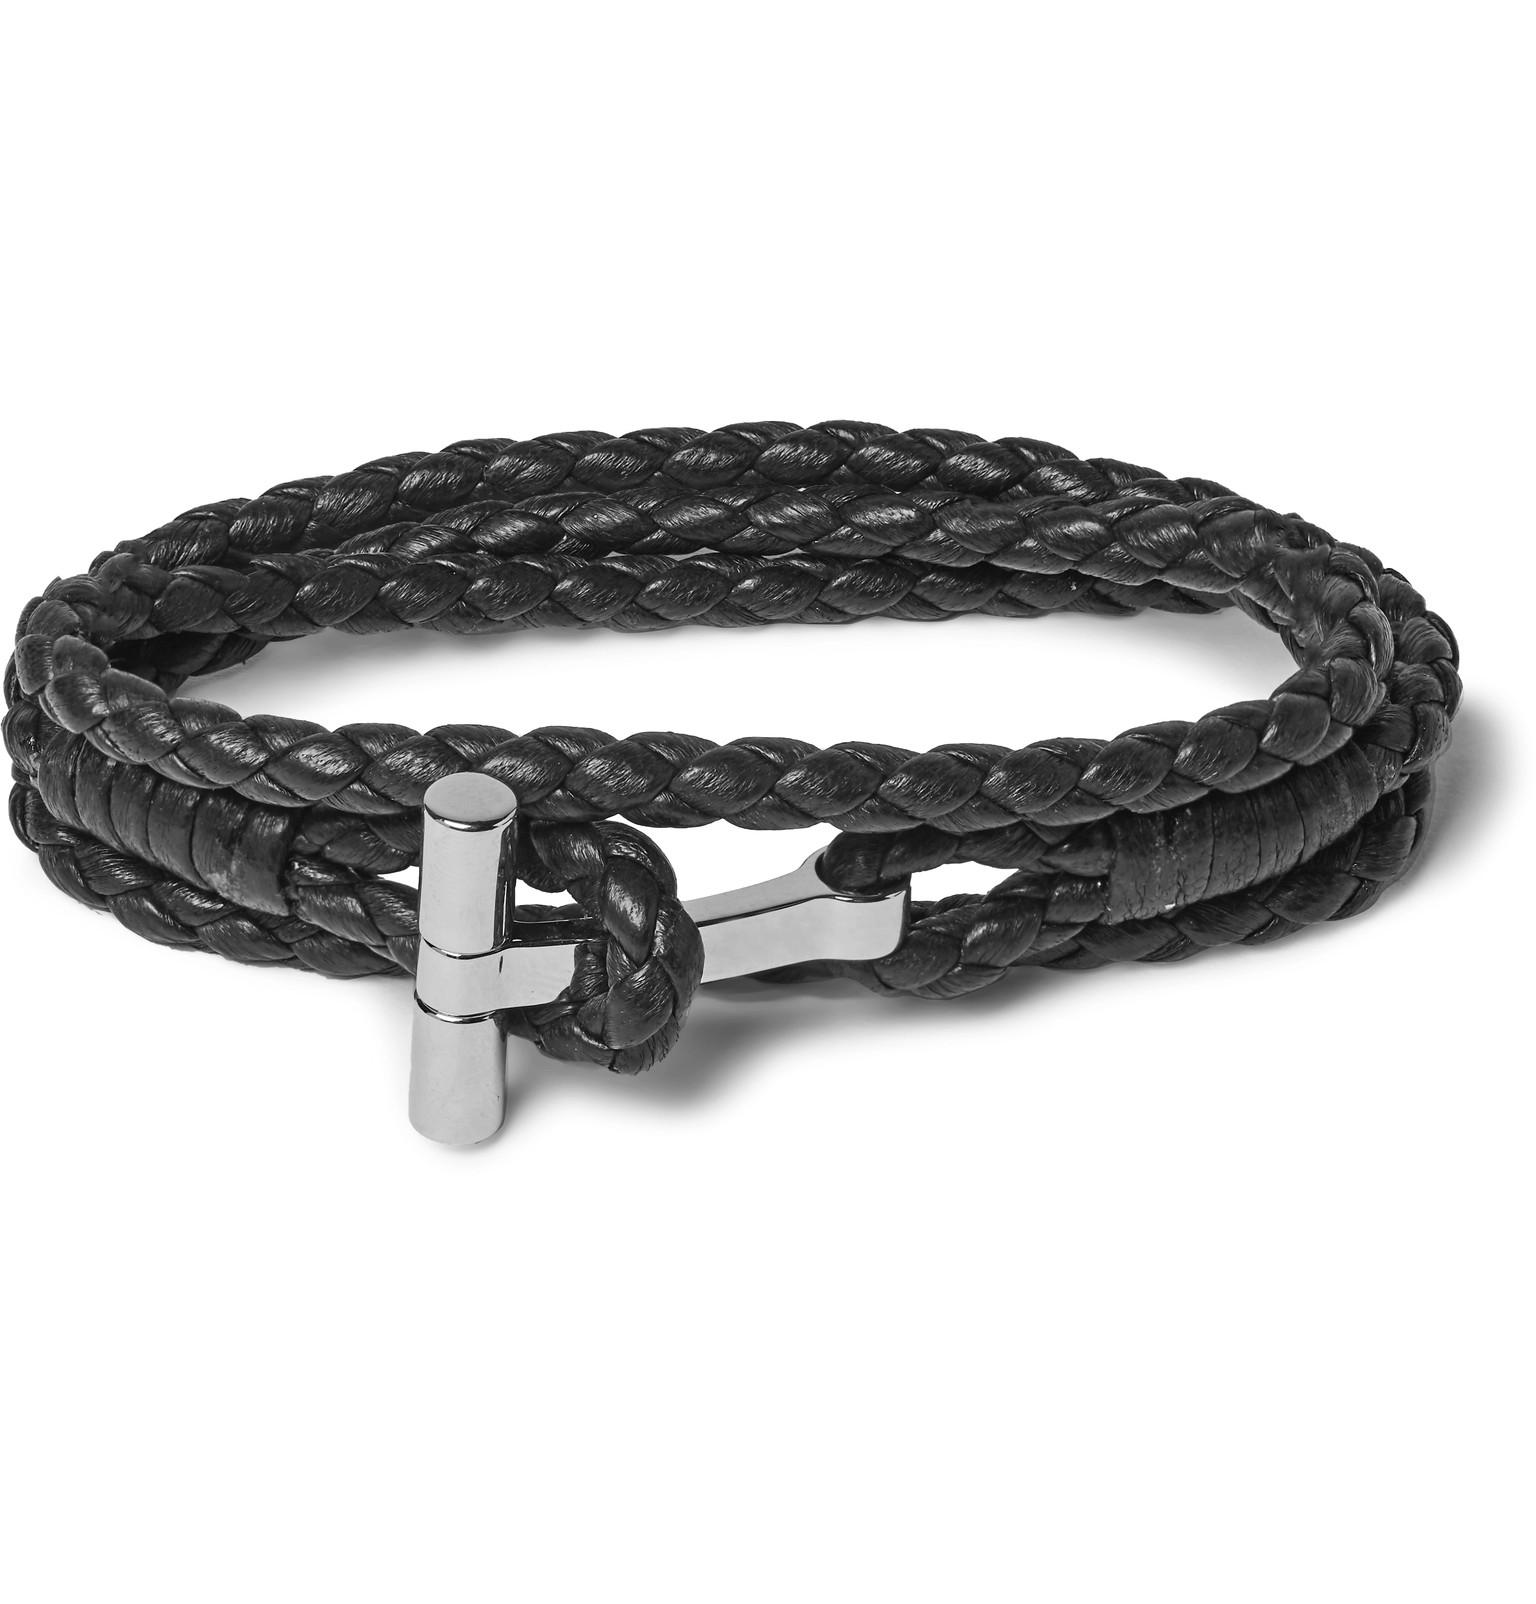 Tom Ford Woven Leather And Gold-tone Wrap Bracelet in Black for Men - Lyst